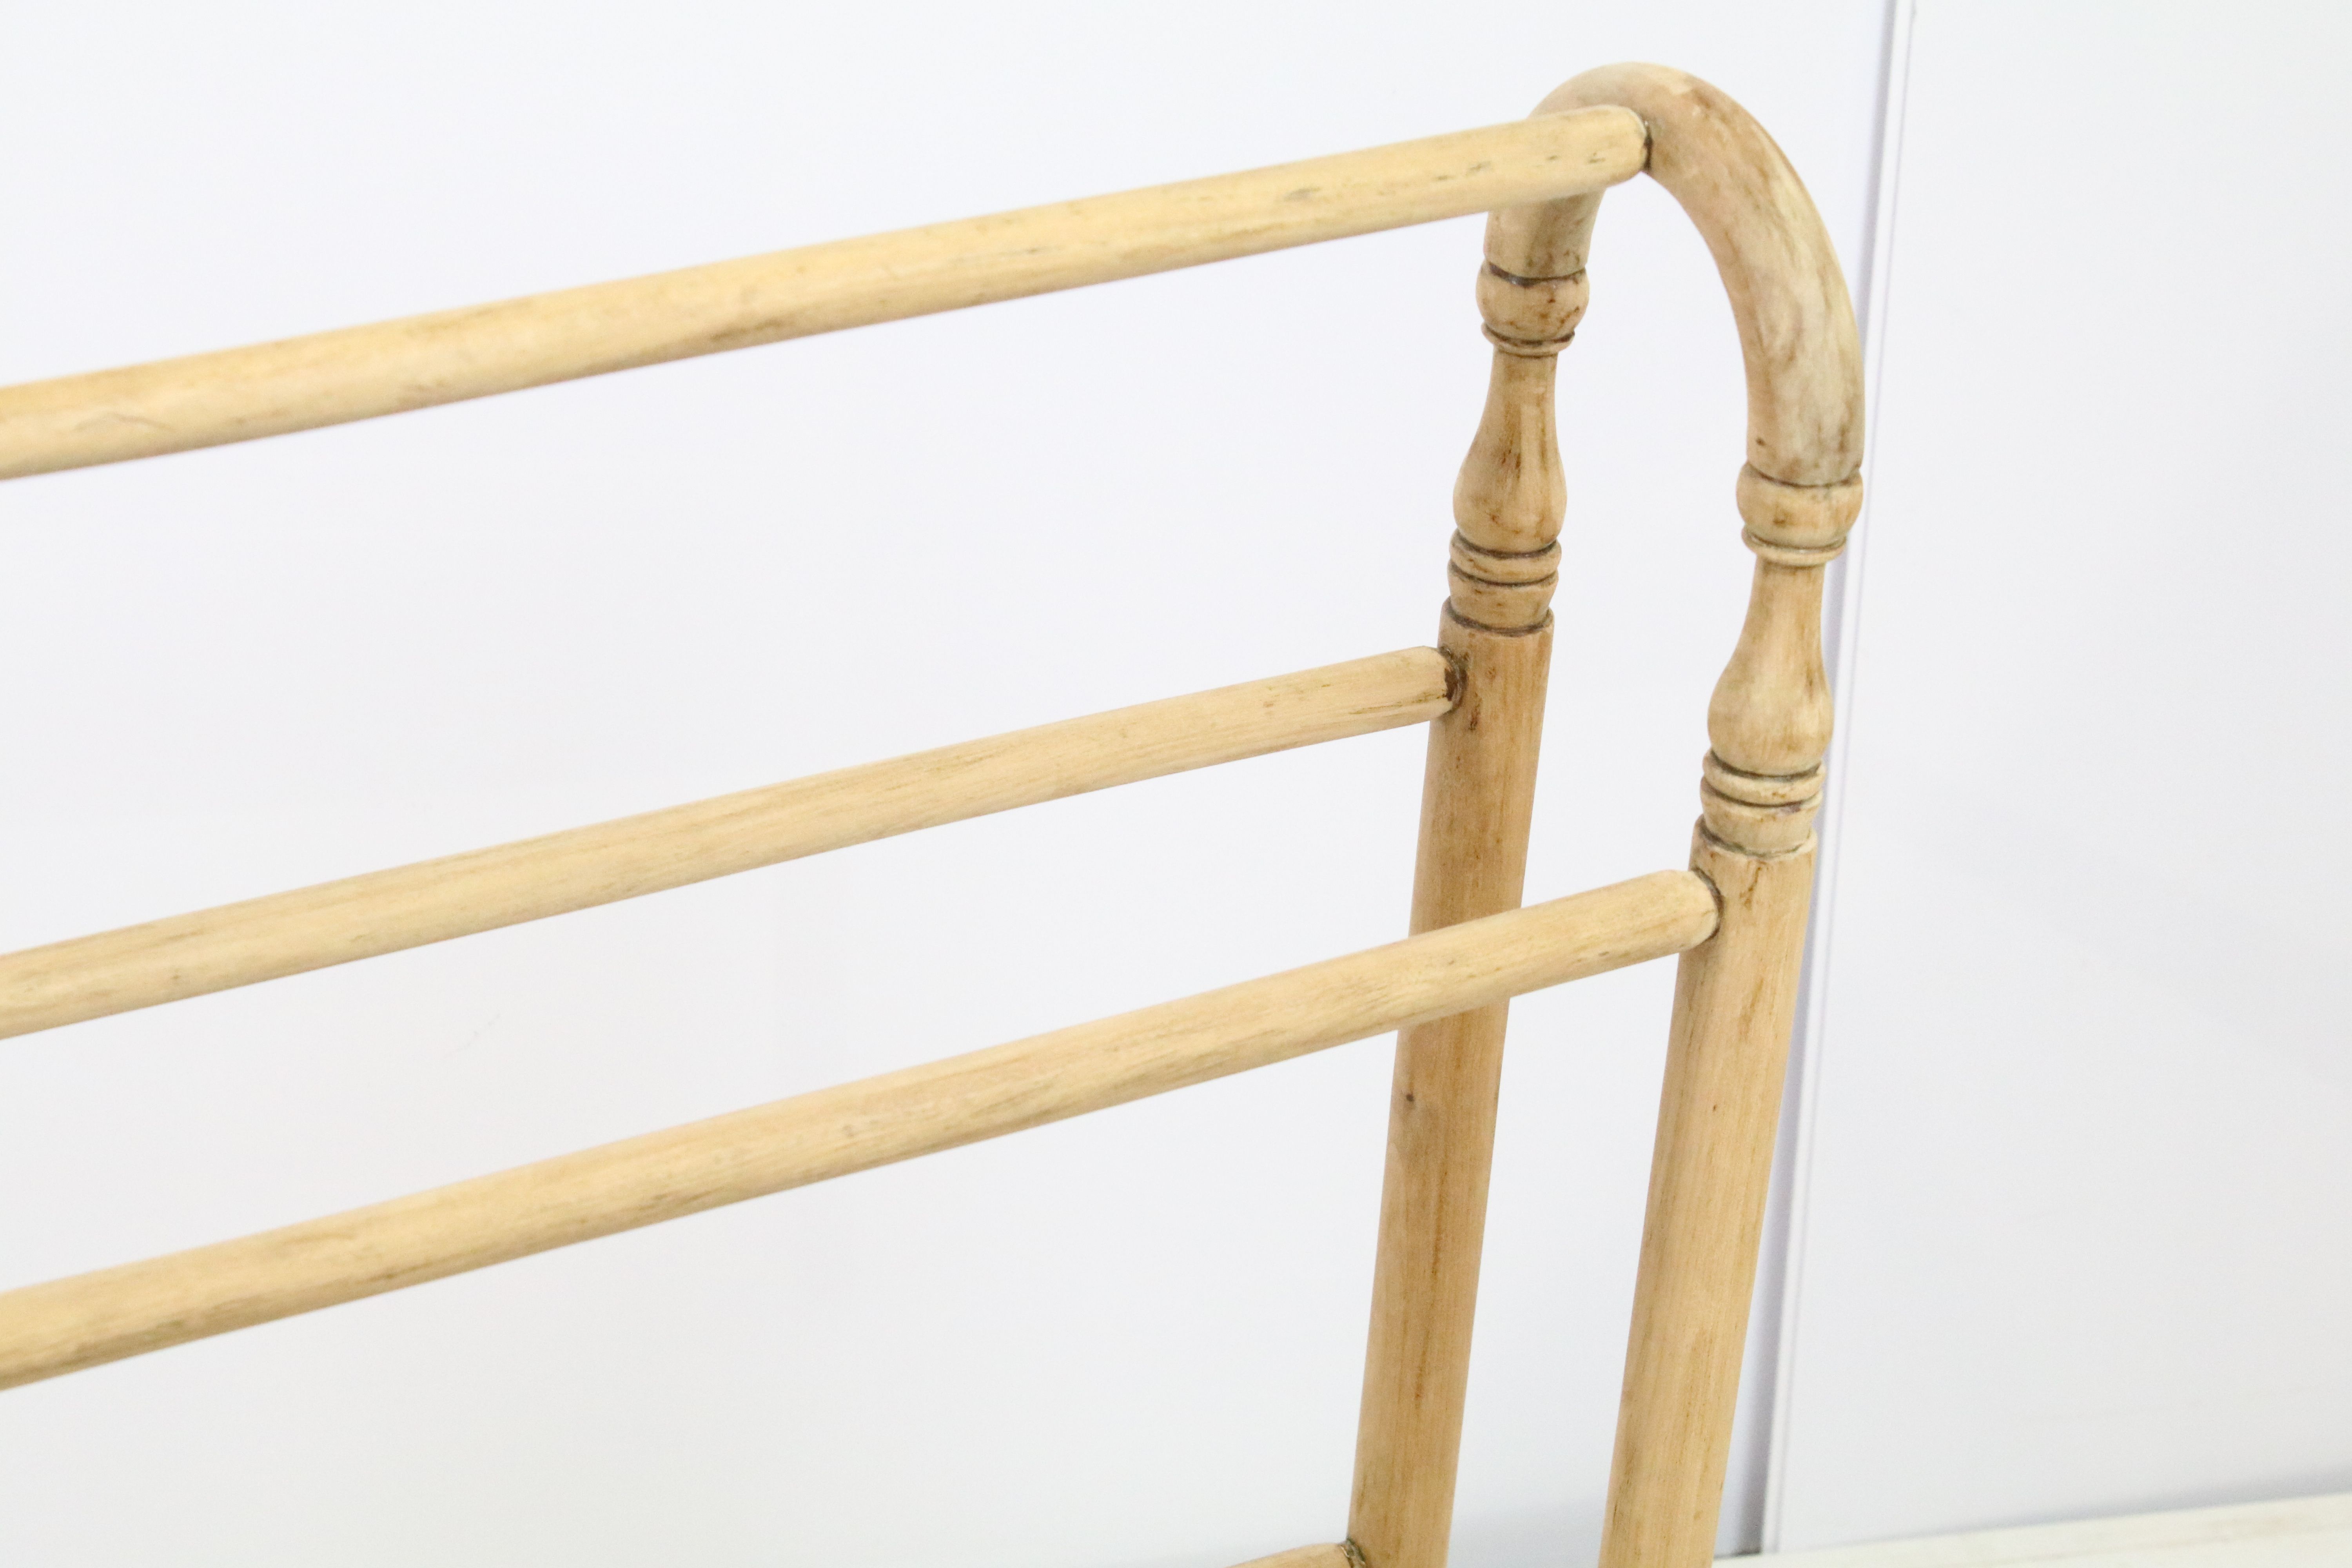 Late 19th / early 20th century pine towel rail, 67cm long x 78cm high - Image 3 of 4